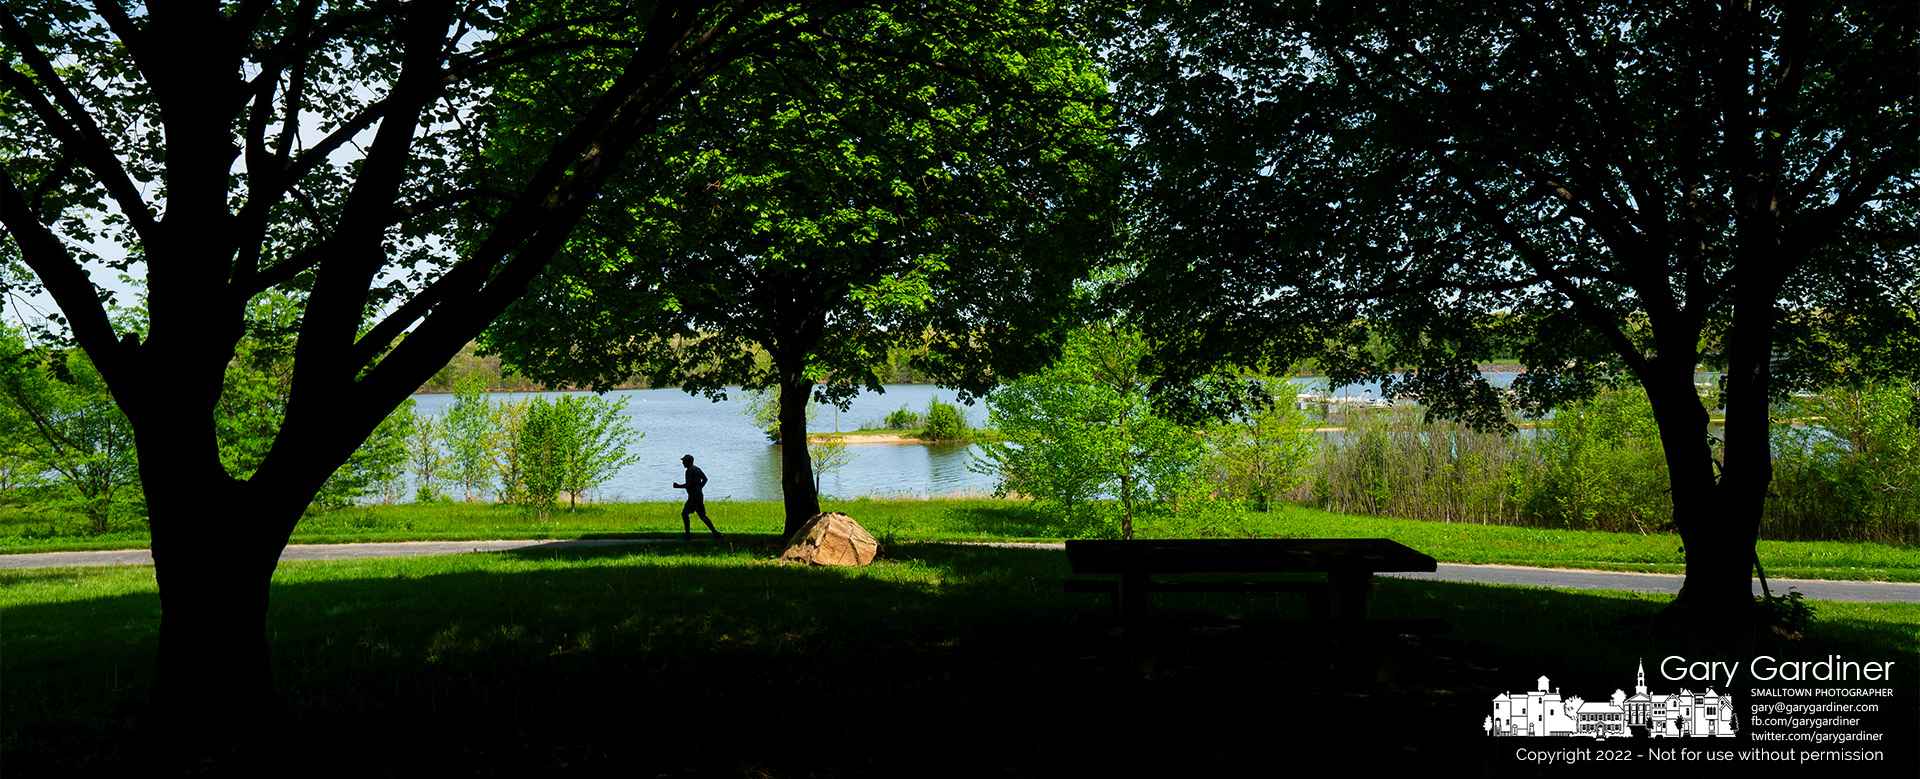 A runner passes under the shade of a tree on a section of the bike path that runs along the shoreline at Hoover Reservoir. My Final Photo for May 11, 2022.